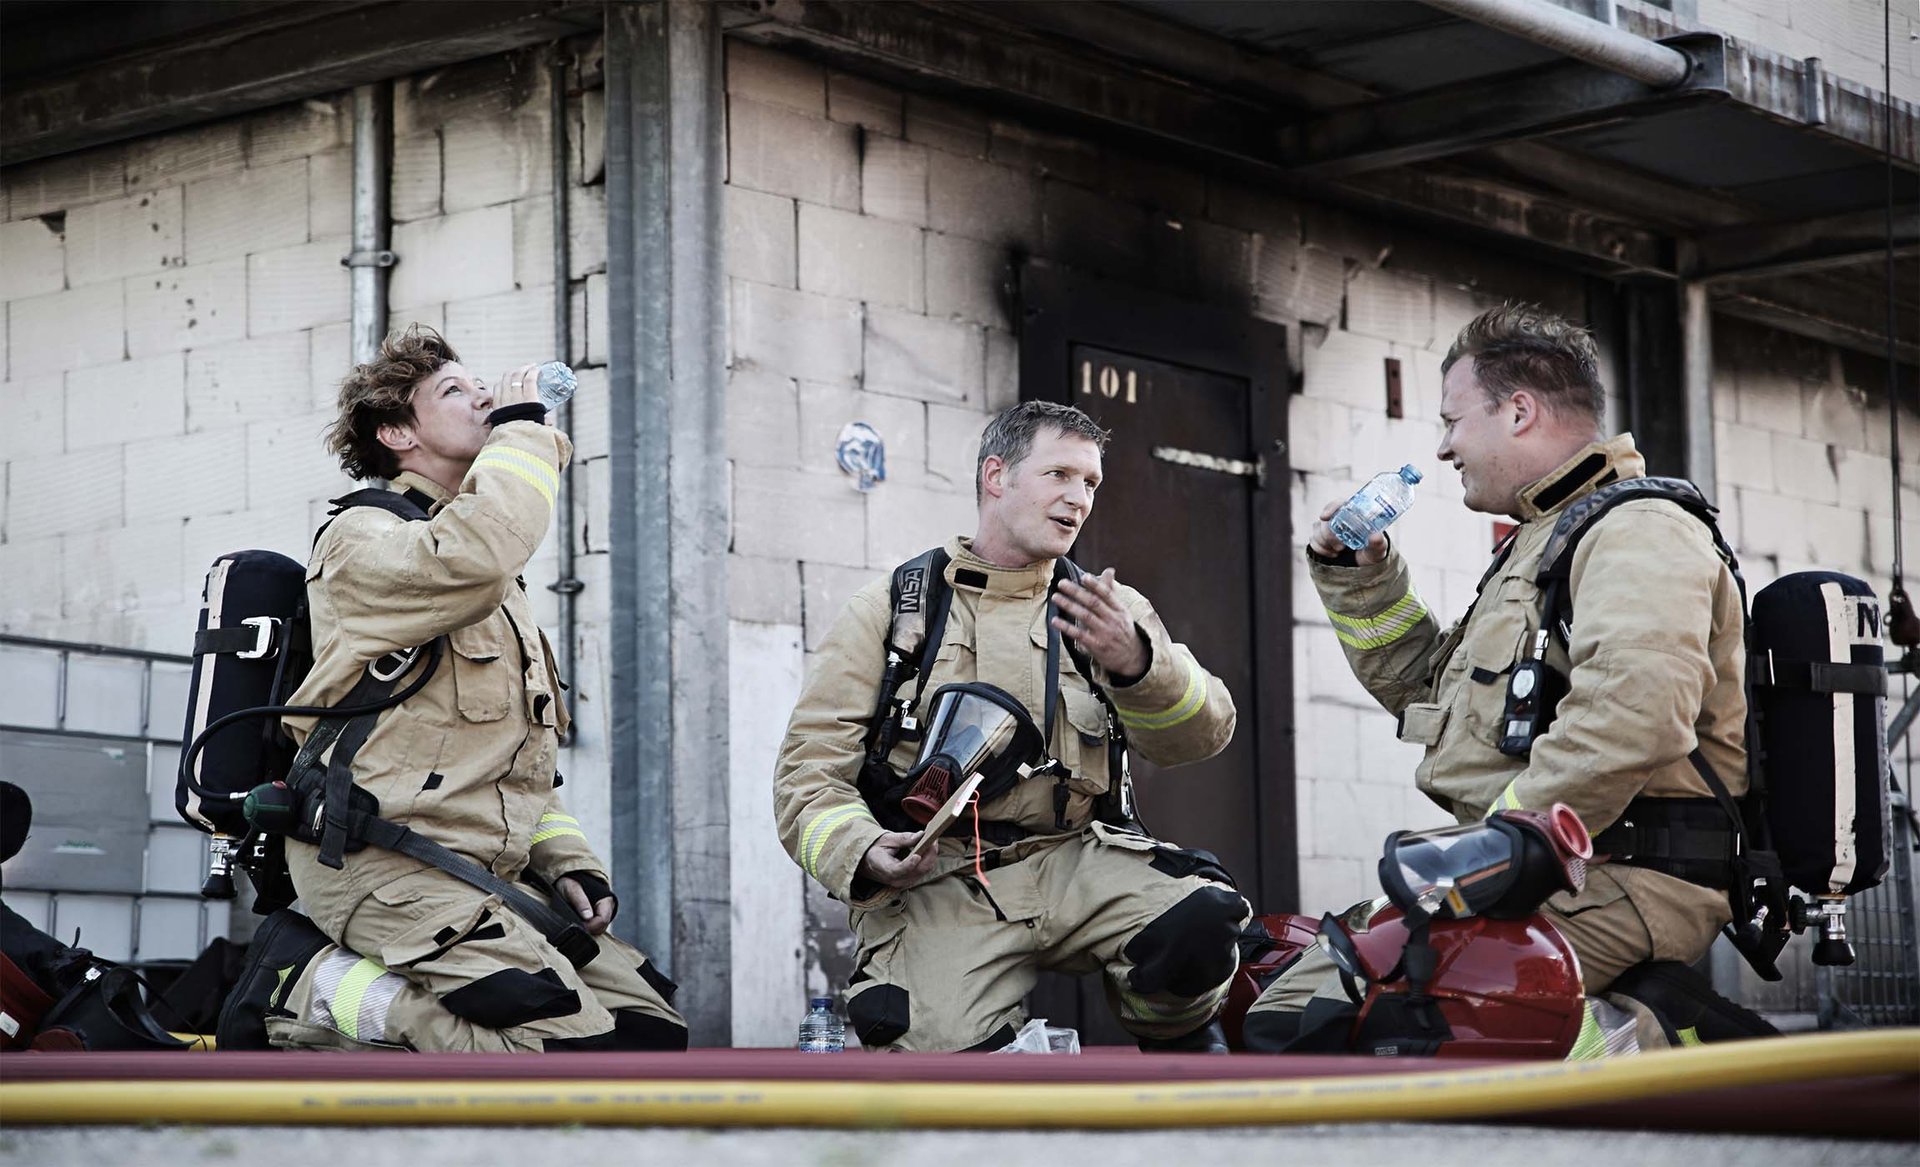 Fire_service_protective_suits_1